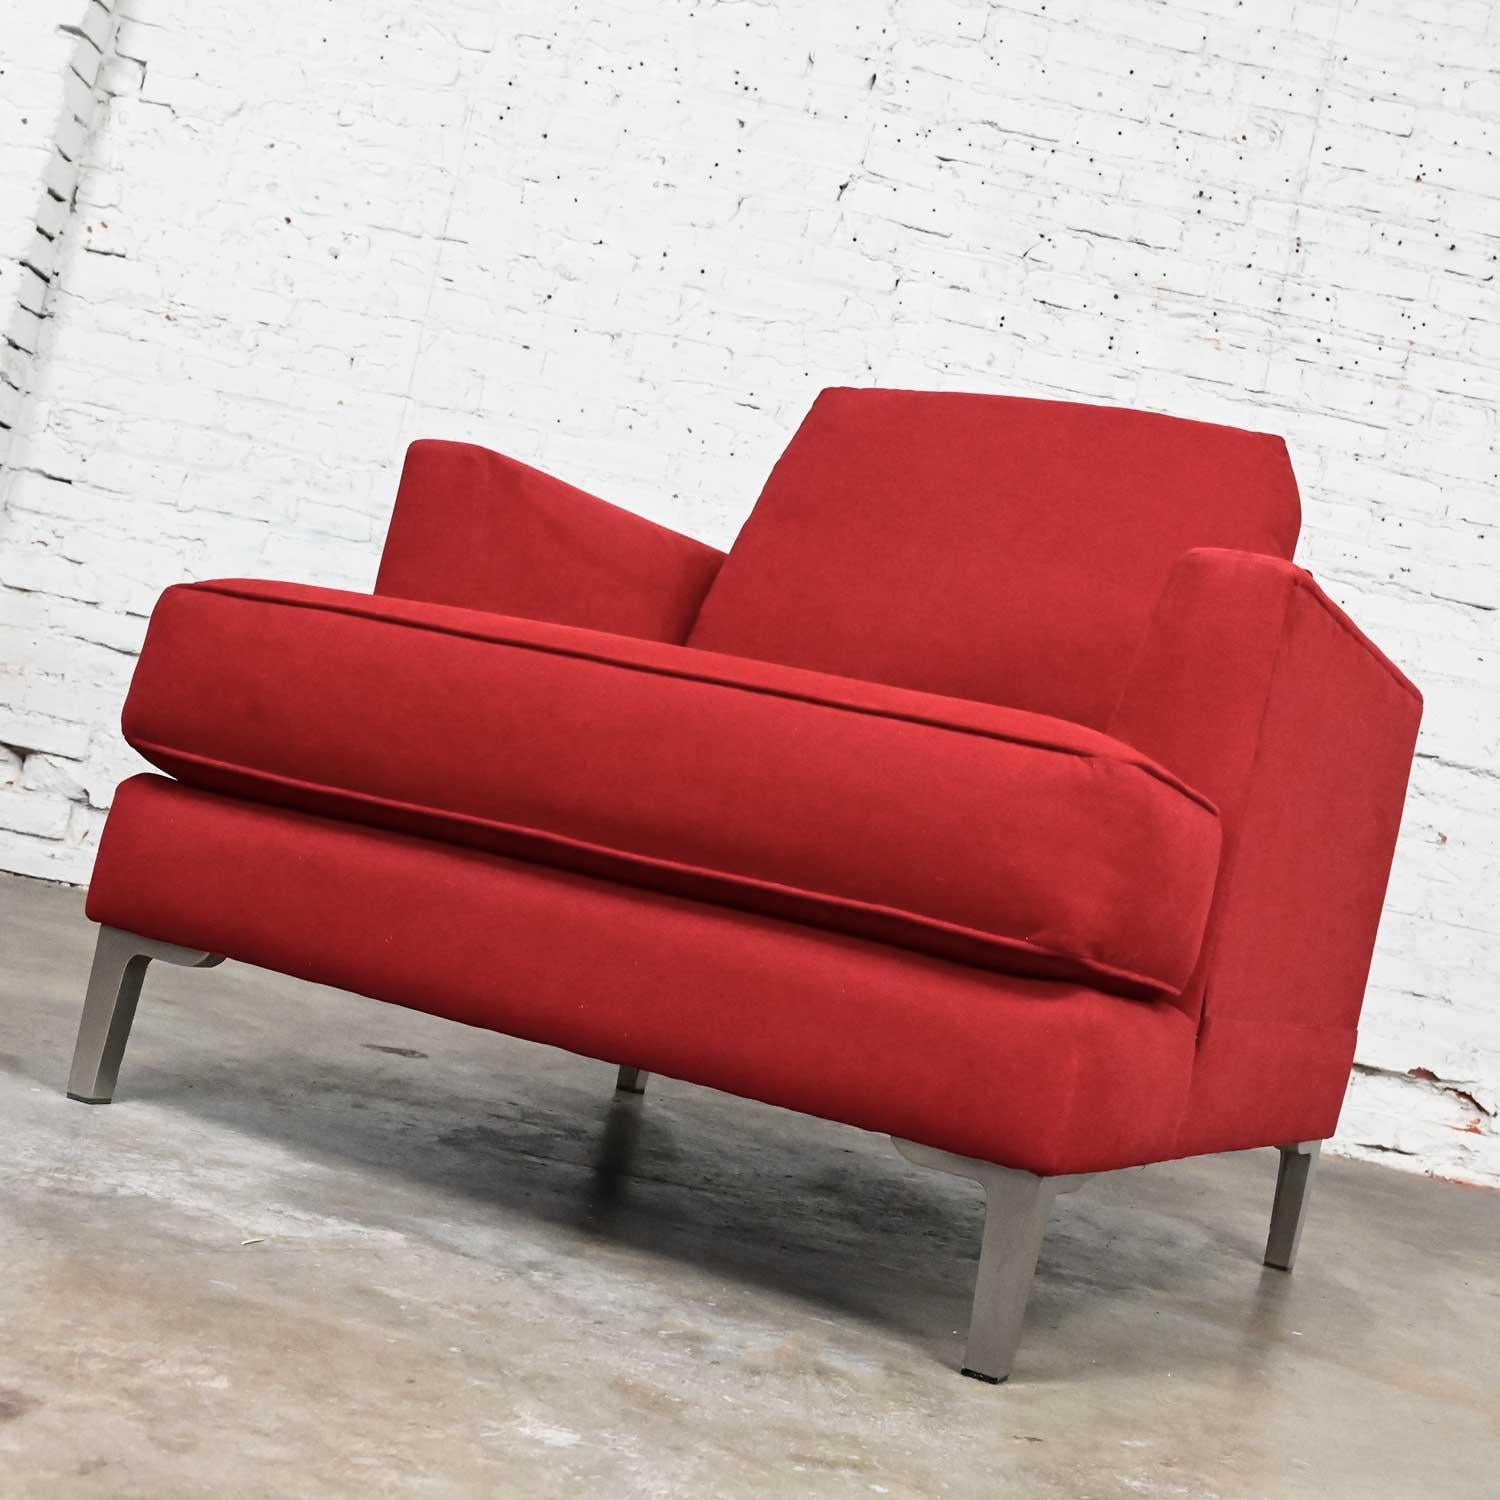 Stunning late 20th to early 21st century Modern Carter Furniture club chair attributed to Zen Collection fully upholstered in bright red euro suede with polished steel legs. Beautiful condition, keeping in mind that this is vintage and not new so